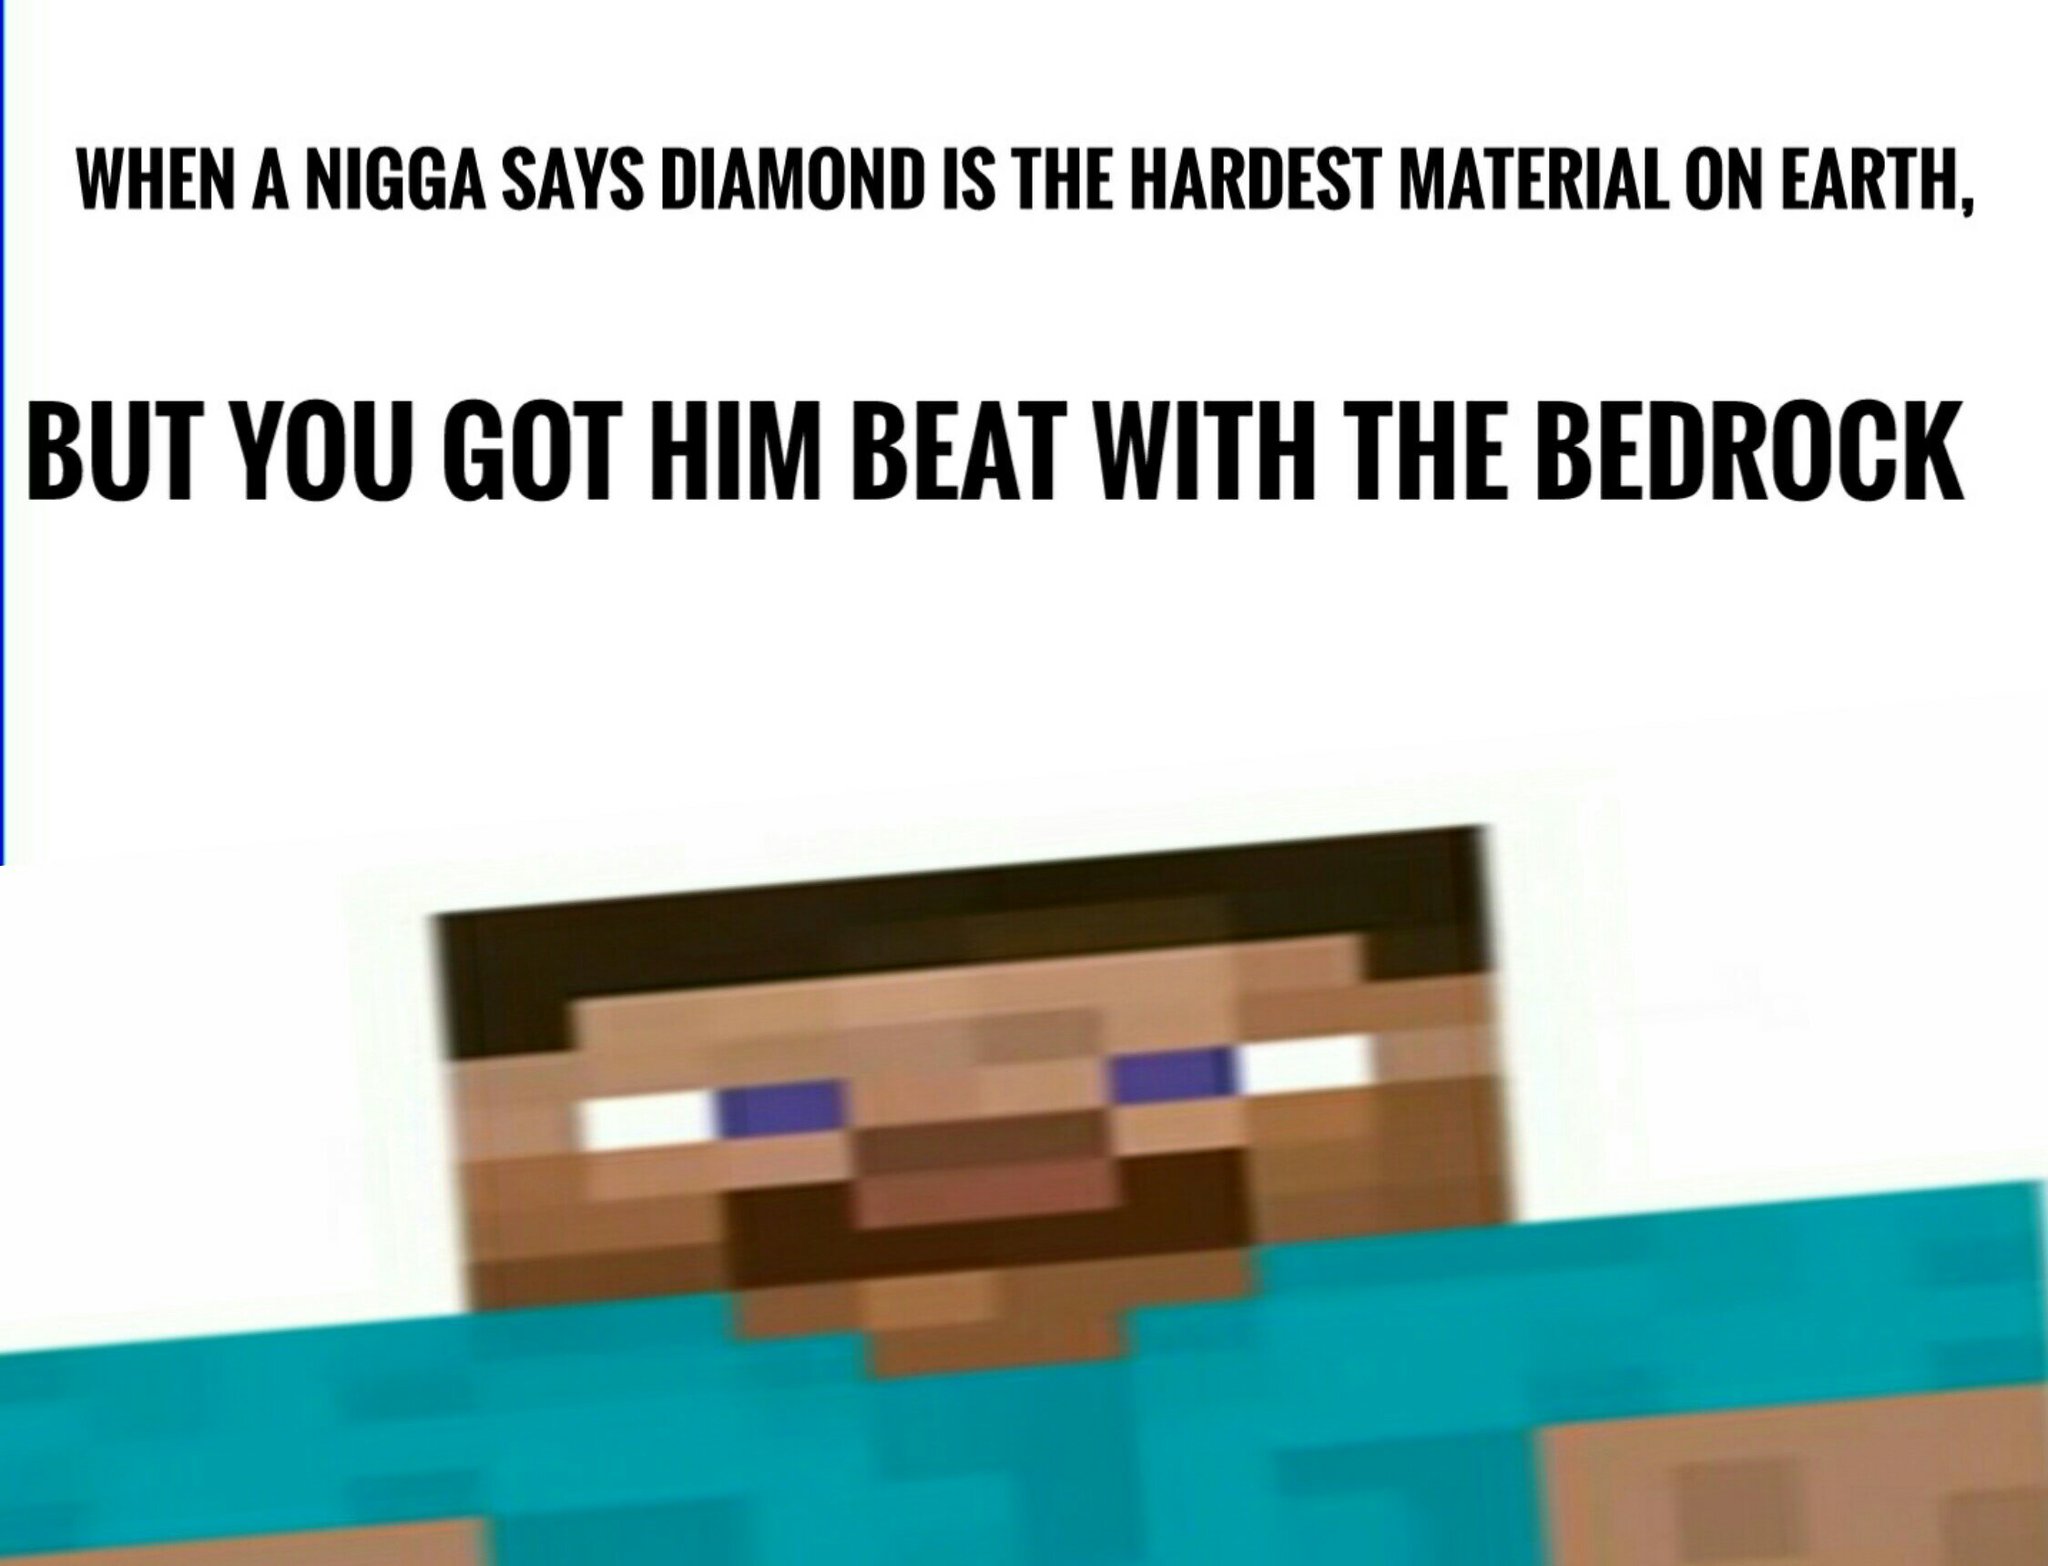 You know I'm all aboot dat bedrock - meme